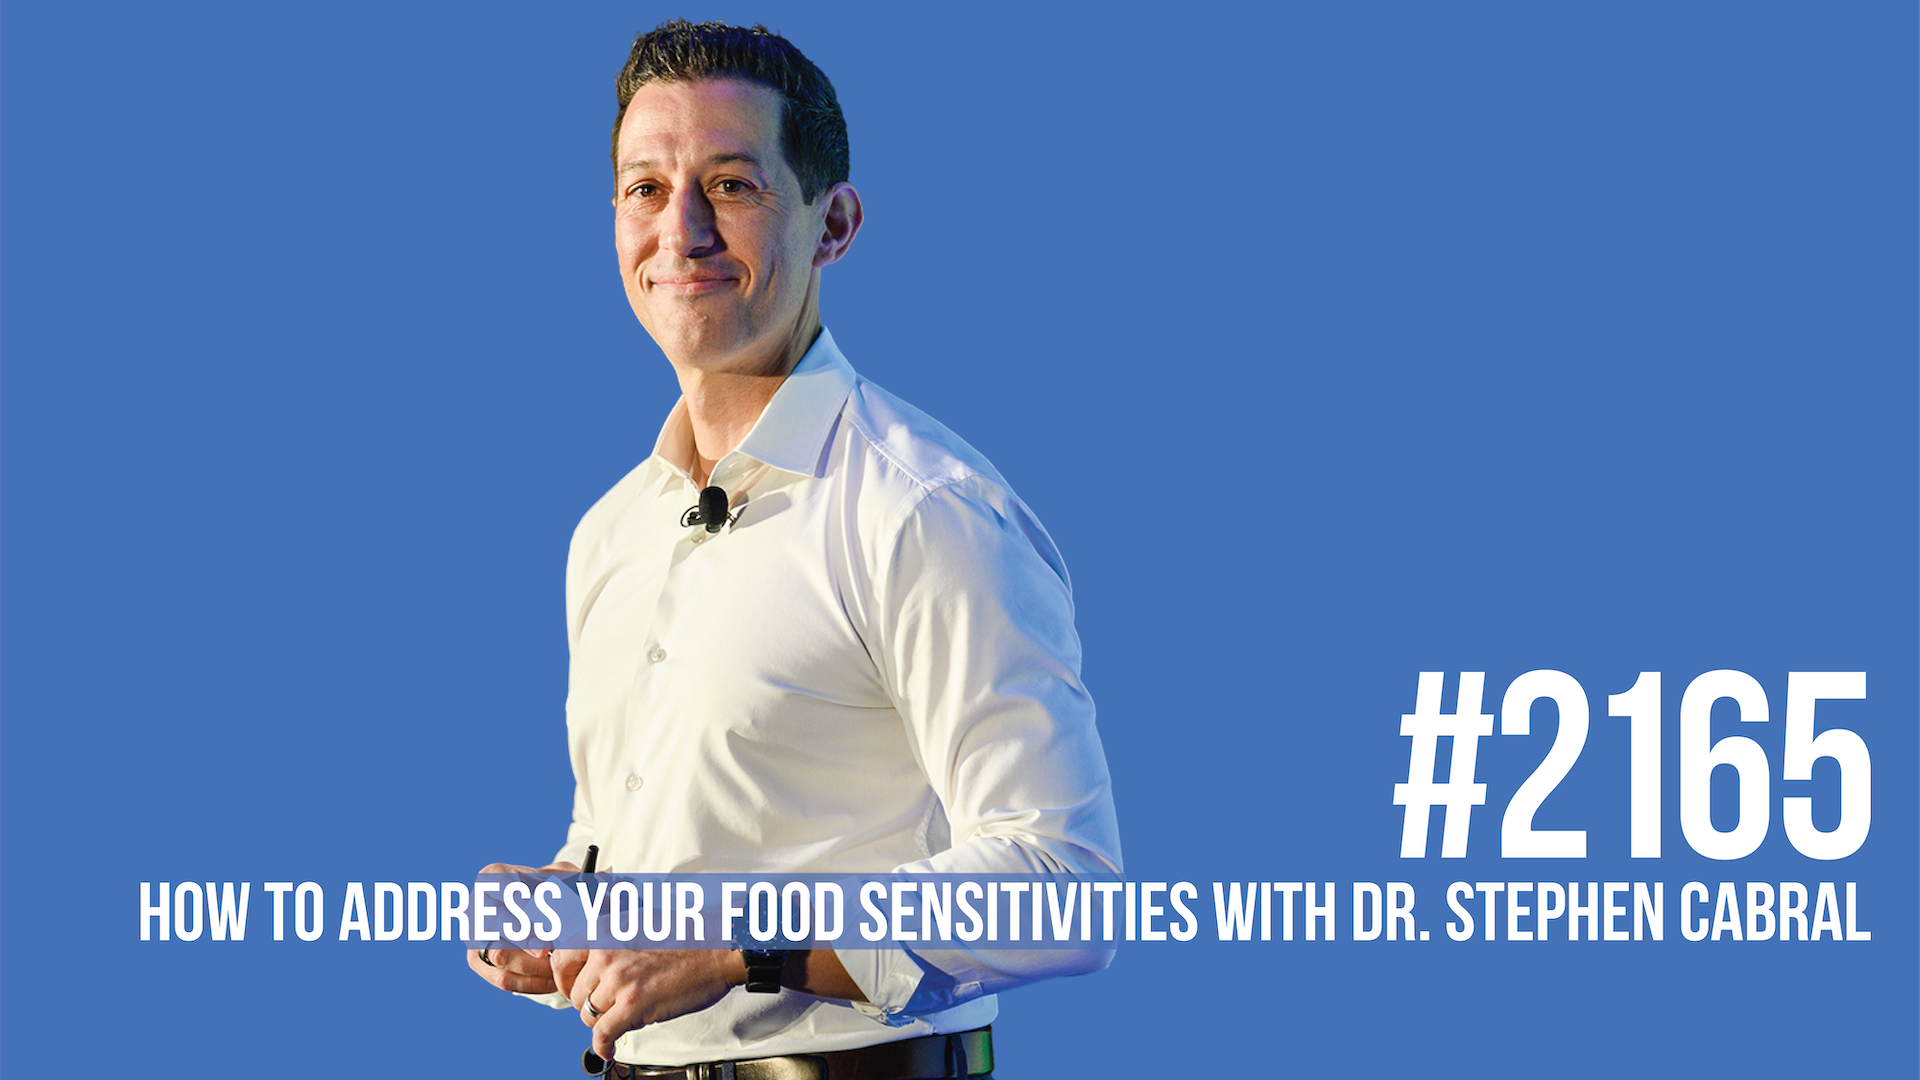 2165: How To Address Your Food Sensitivities With Dr. Stephen Cabral